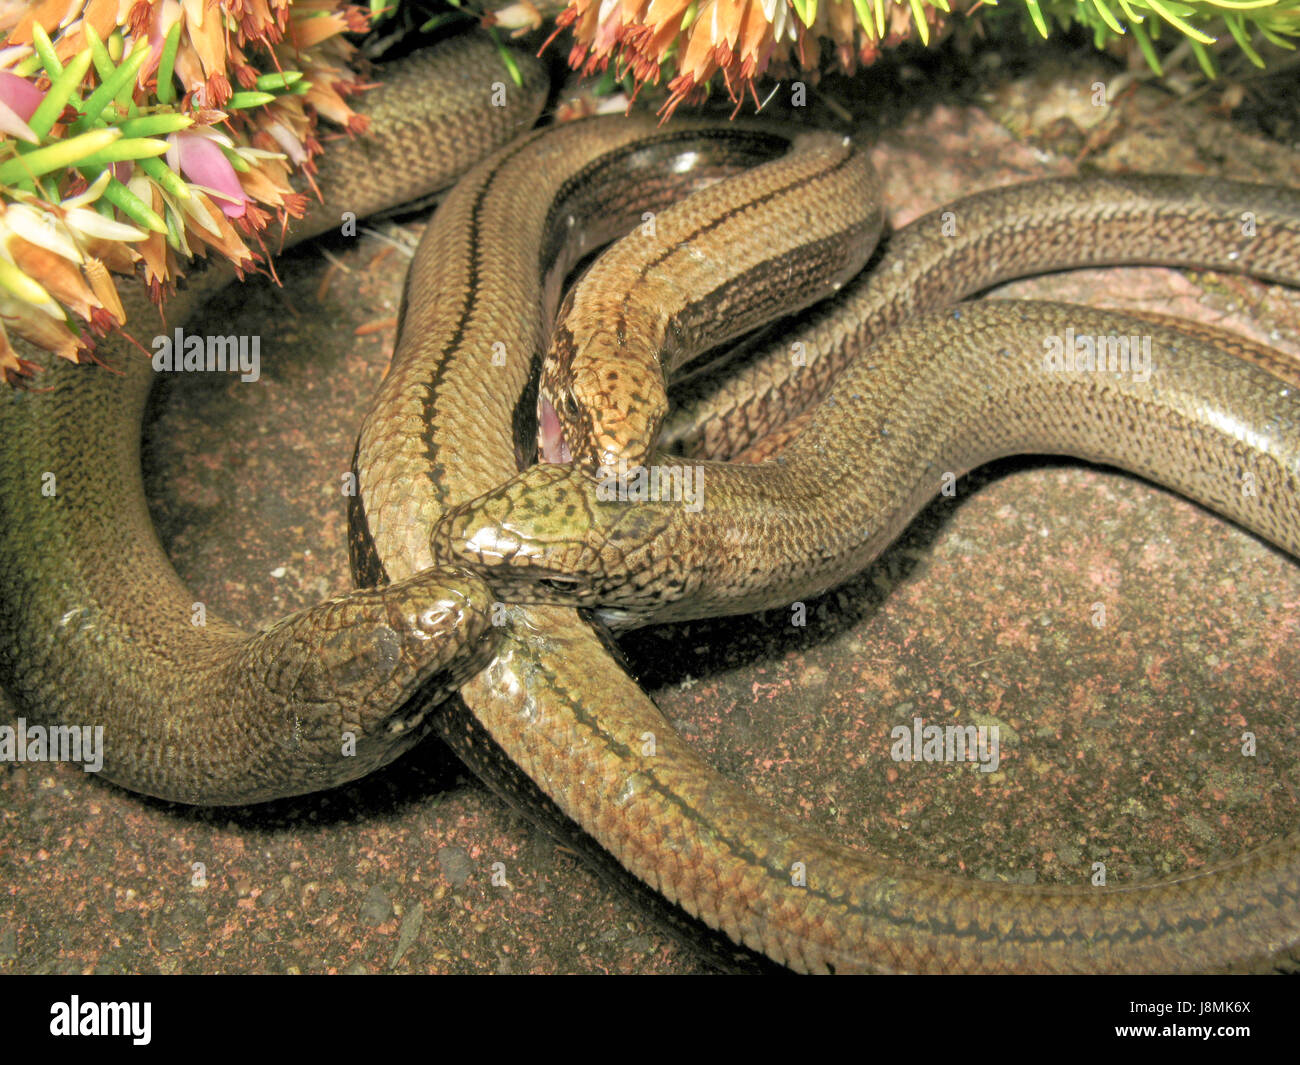 Biting Lizards! Three Slow-worms bite each other, aggressive courtship (Anguis fragilis) 2 males trying to mate with a female who bites back.  2 of 2 Stock Photo